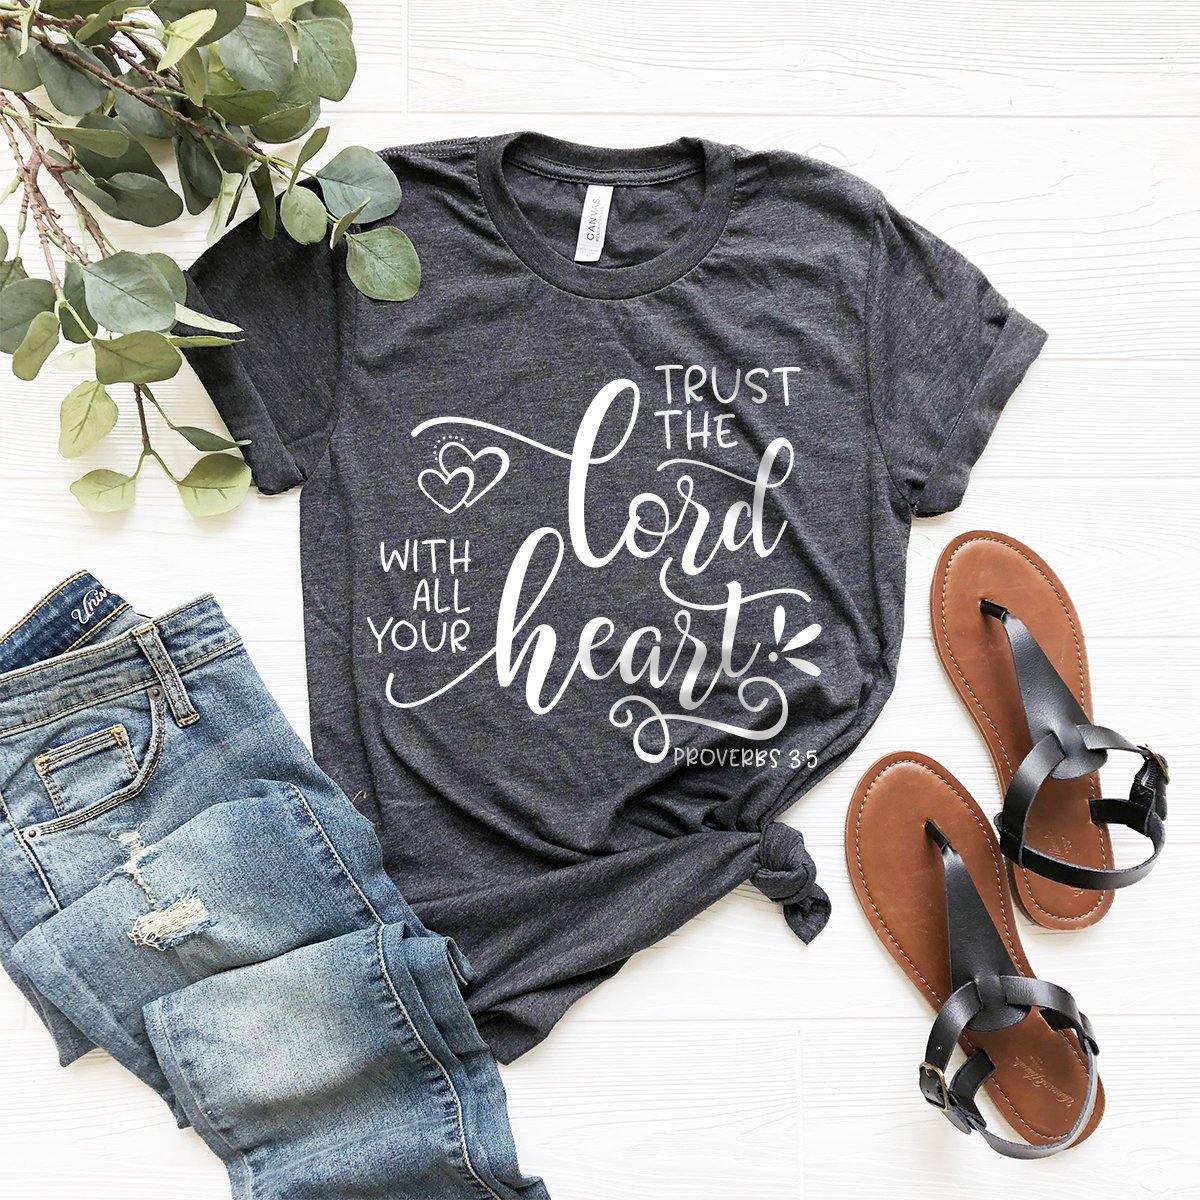 Christian T-Shirt, Proverbs 3 5 Shirt, Bible Verse Quote Tee, Church Shirt, Jesus Christ Shirt, Trust The Lord With All Your Heart Shirt - Fastdeliverytees.com